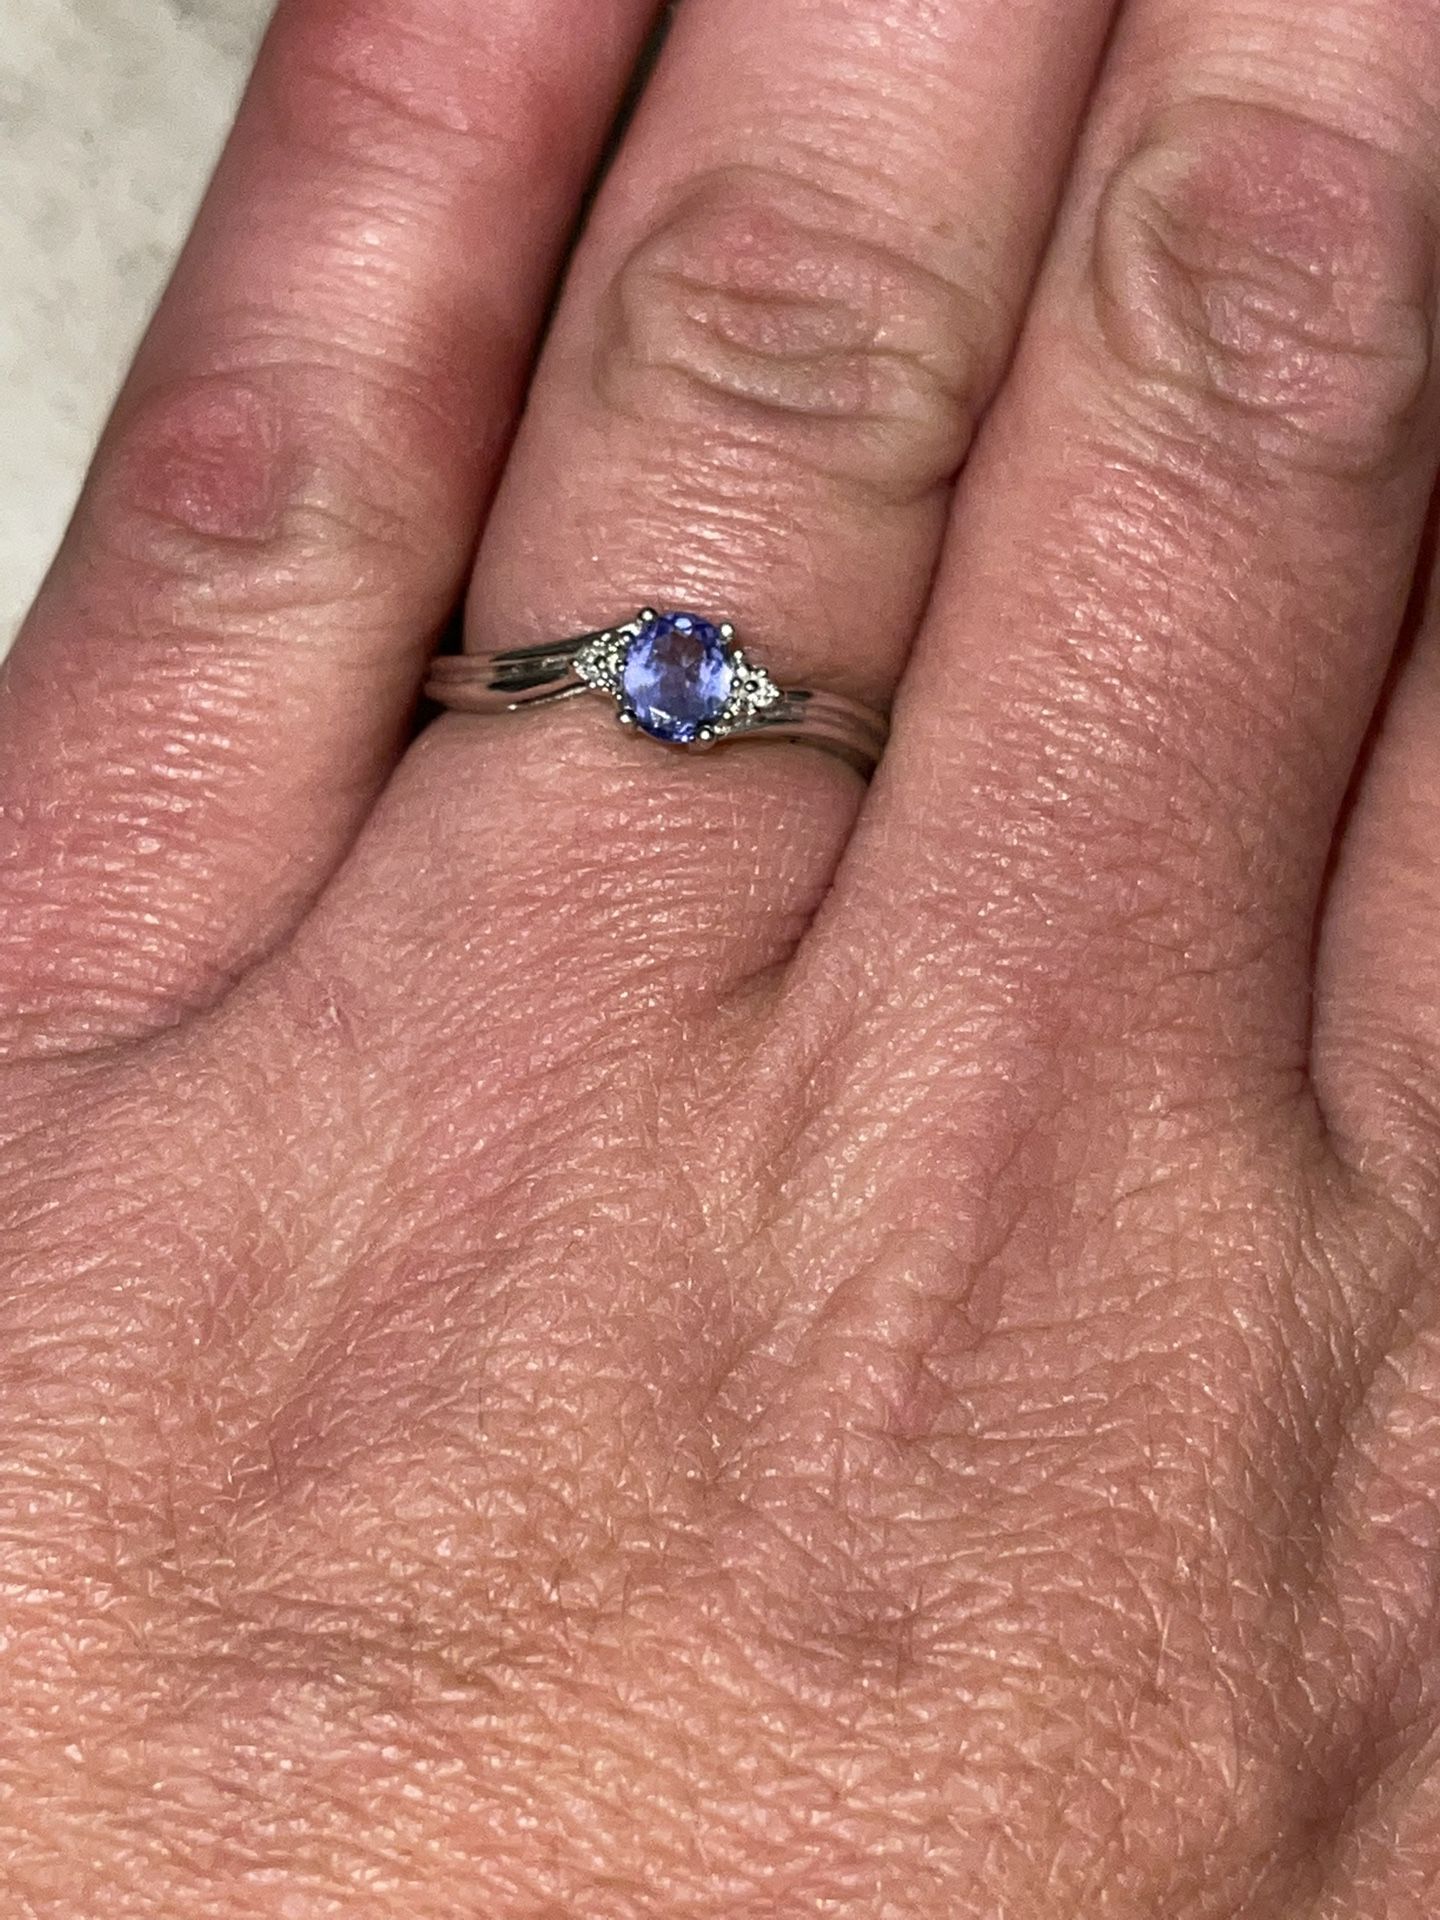 18k White Gold 1Ct. Lavender Sapphire Ring With Diamond Accent 